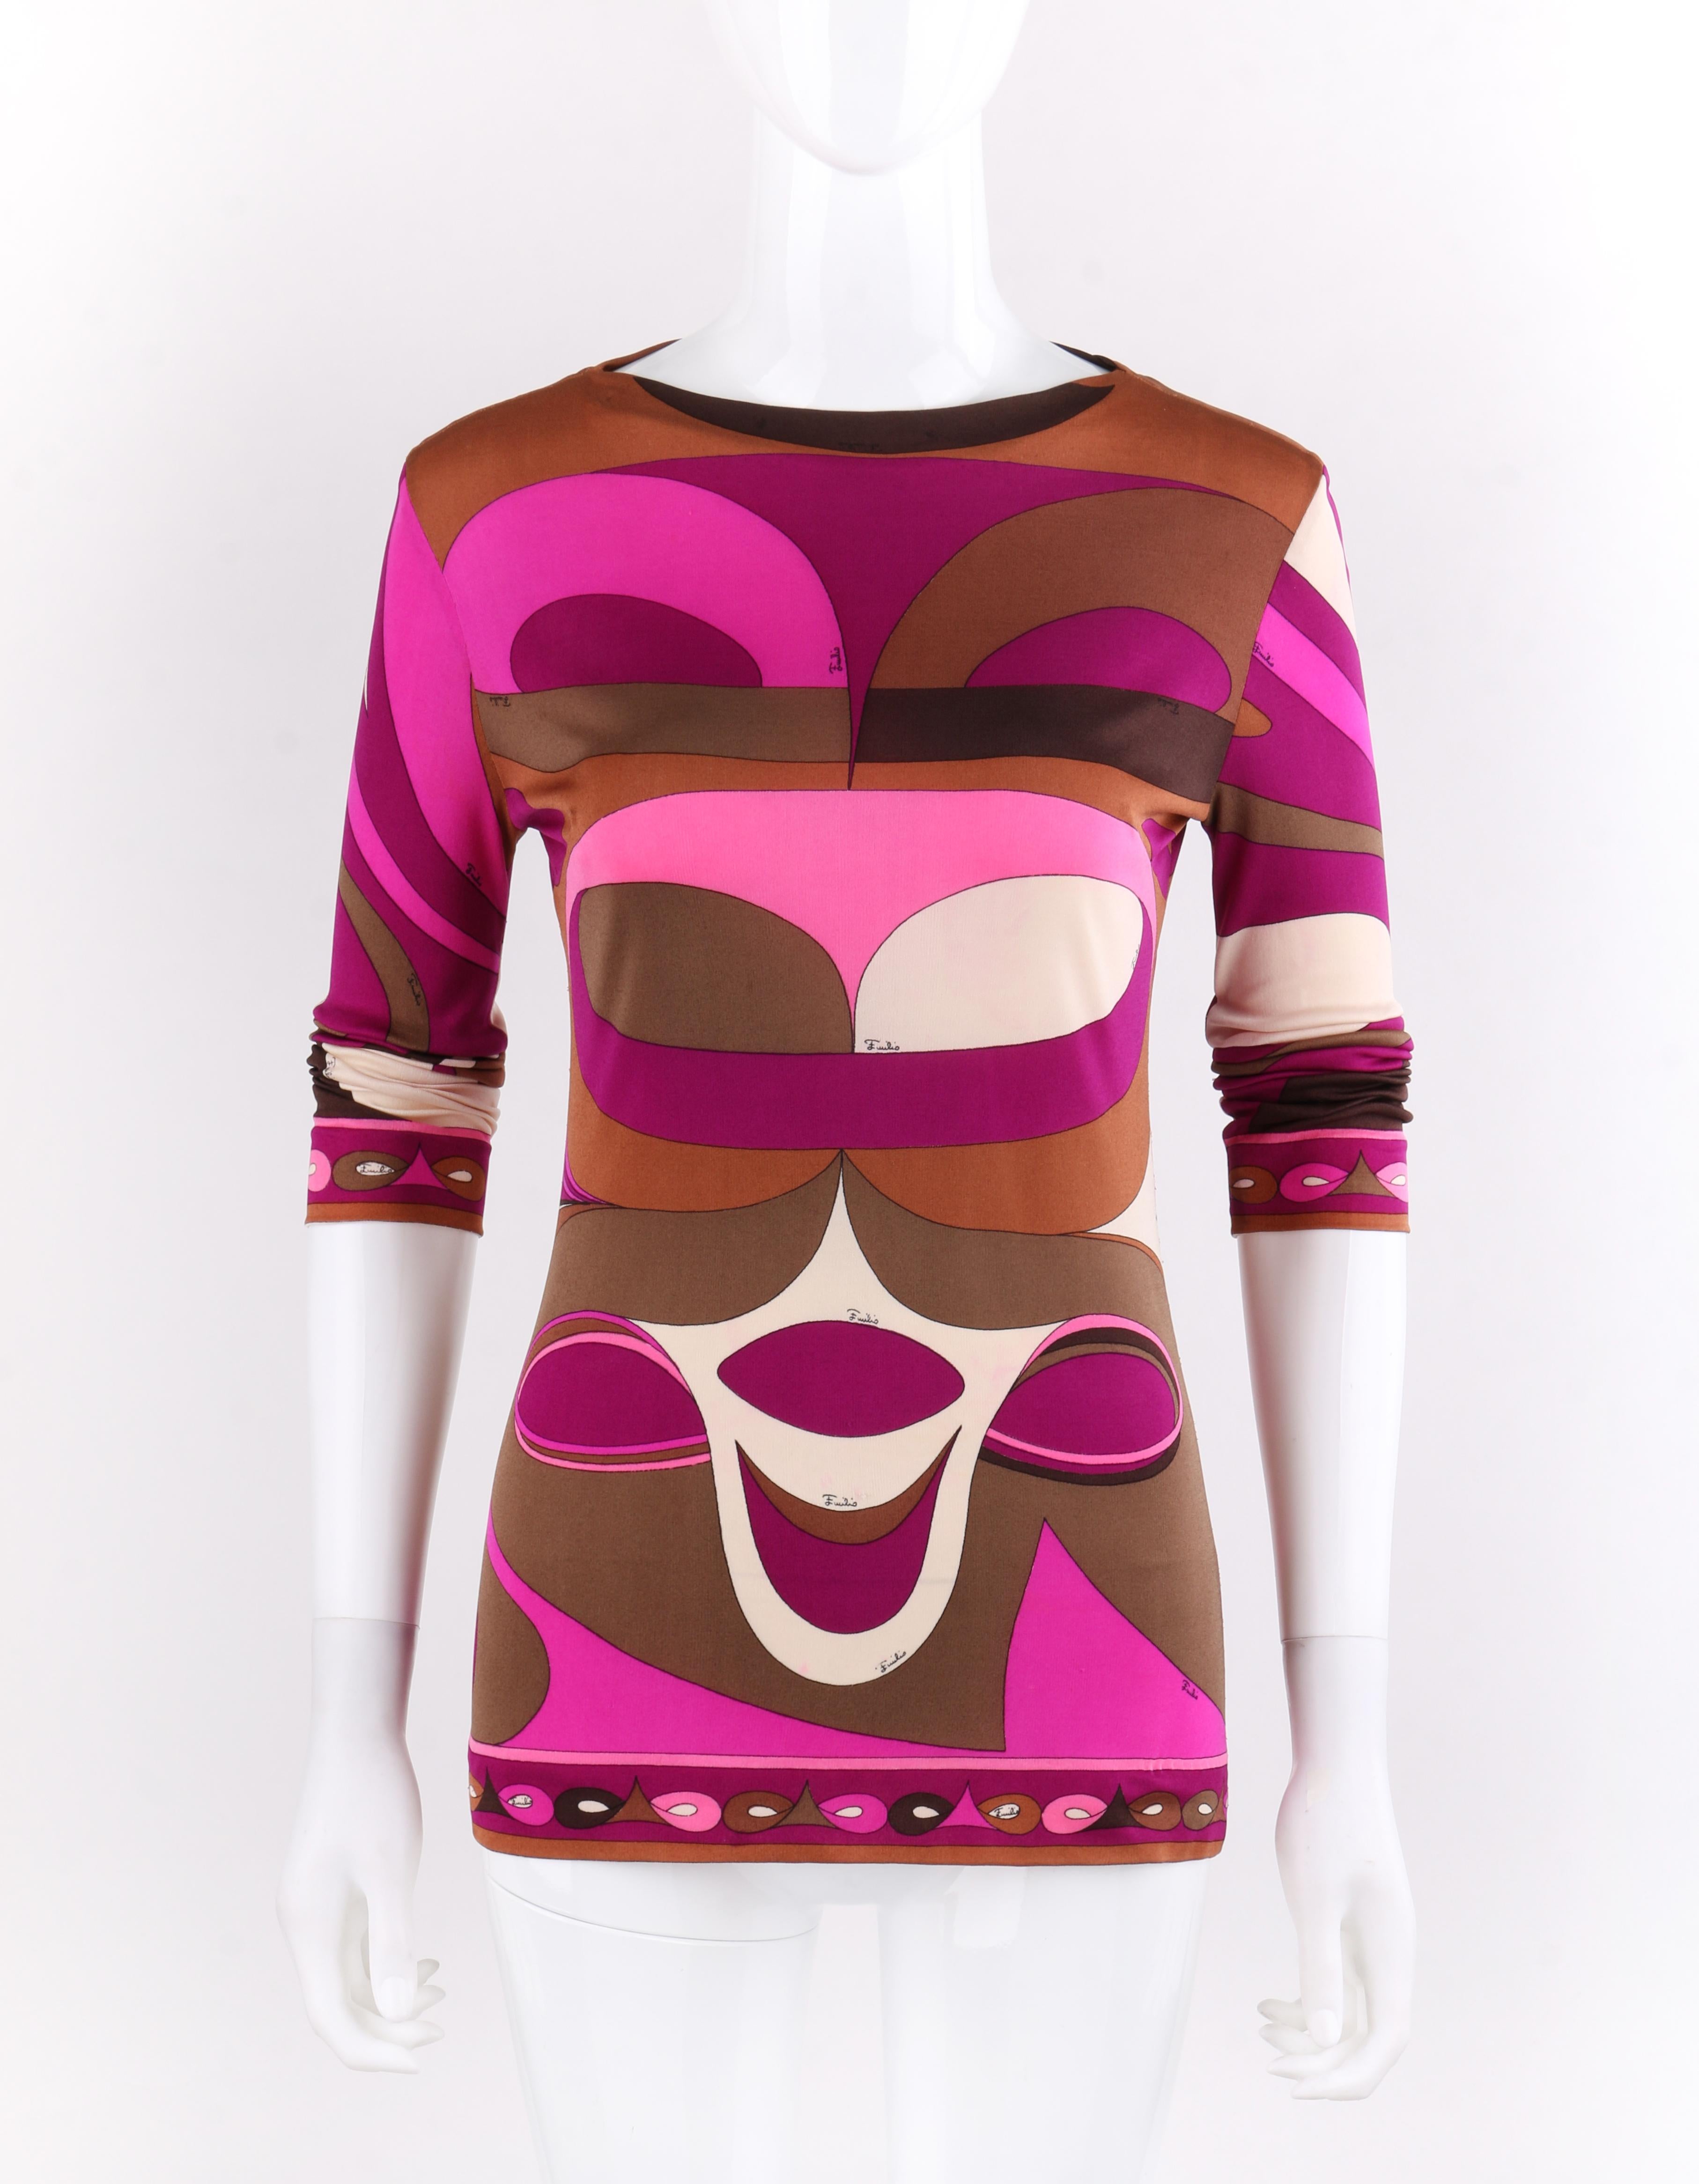 EMILIO PUCCI c.1960's Pink Signature Op Art Silk Long Sleeve Top
 
Circa: 1960’s
Label(s): Emilio Pucci; For Lord & Taylor
Designer: Emilio Pucci
Style: Long sleeve top
Color(s): Shades of pink, brown, black, white (exterior, interior)
Lined: